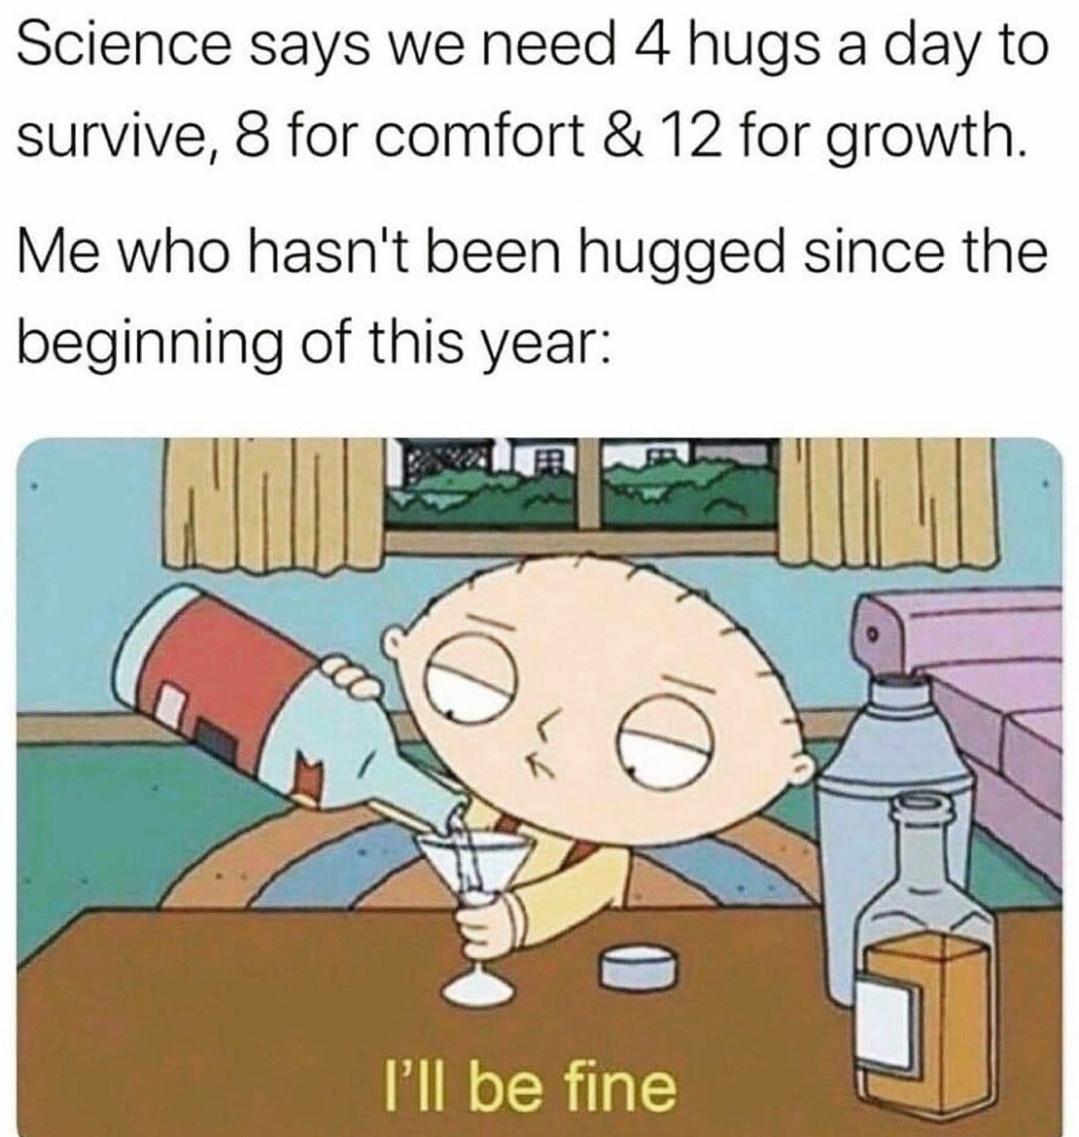 monday morning randomness - haven t been hugged in 10 years - Science says we need 4 hugs a day to survive, 8 for comfort & 12 for growth. Me who hasn't been hugged since the beginning of this year No I'll be fine